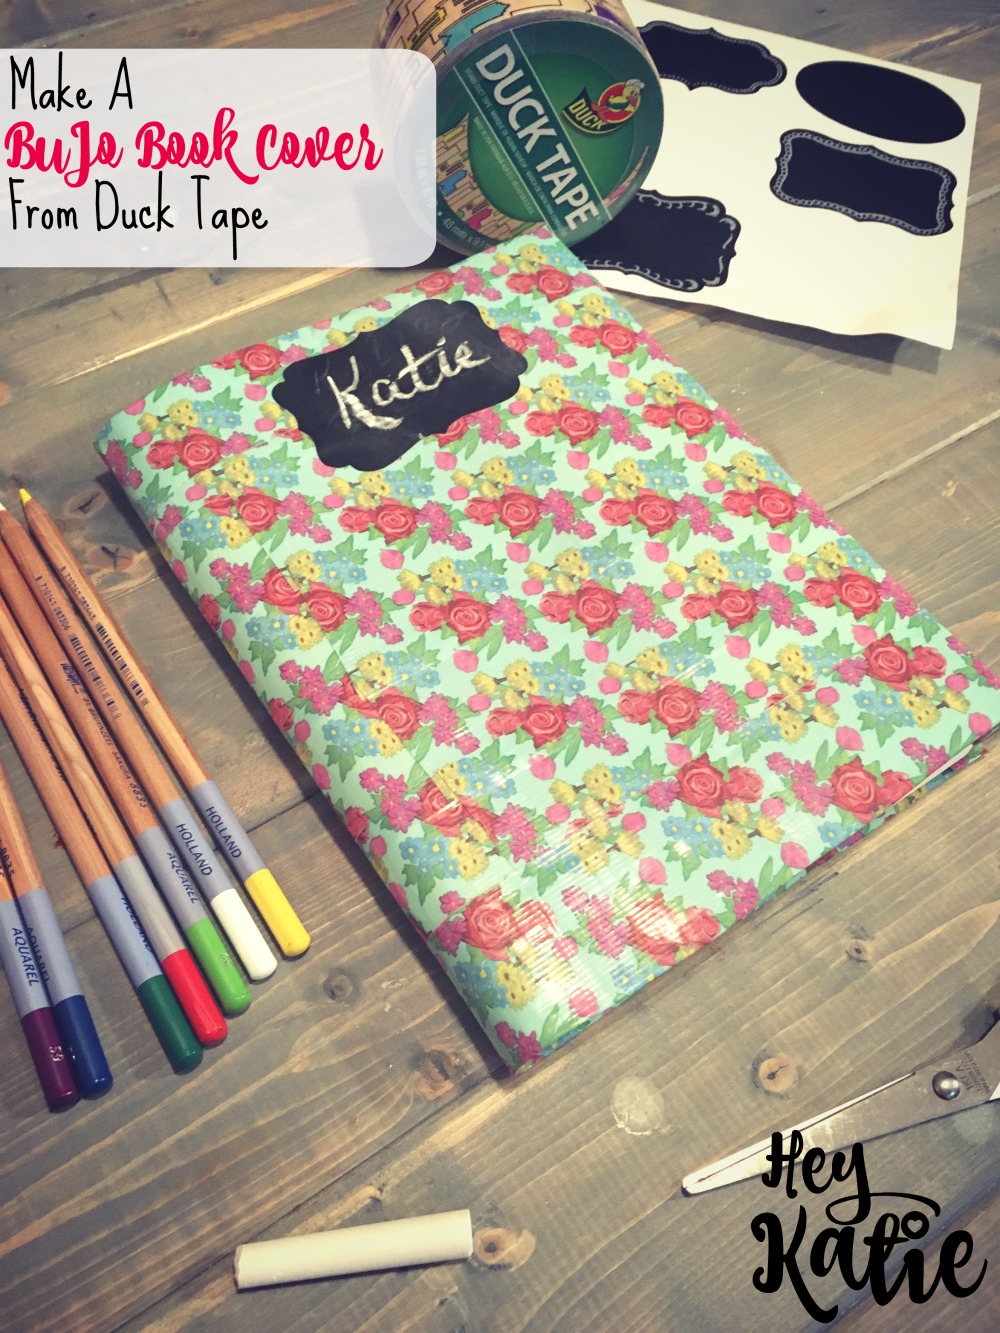 Make a BuJo Book Cover from Duck Tape